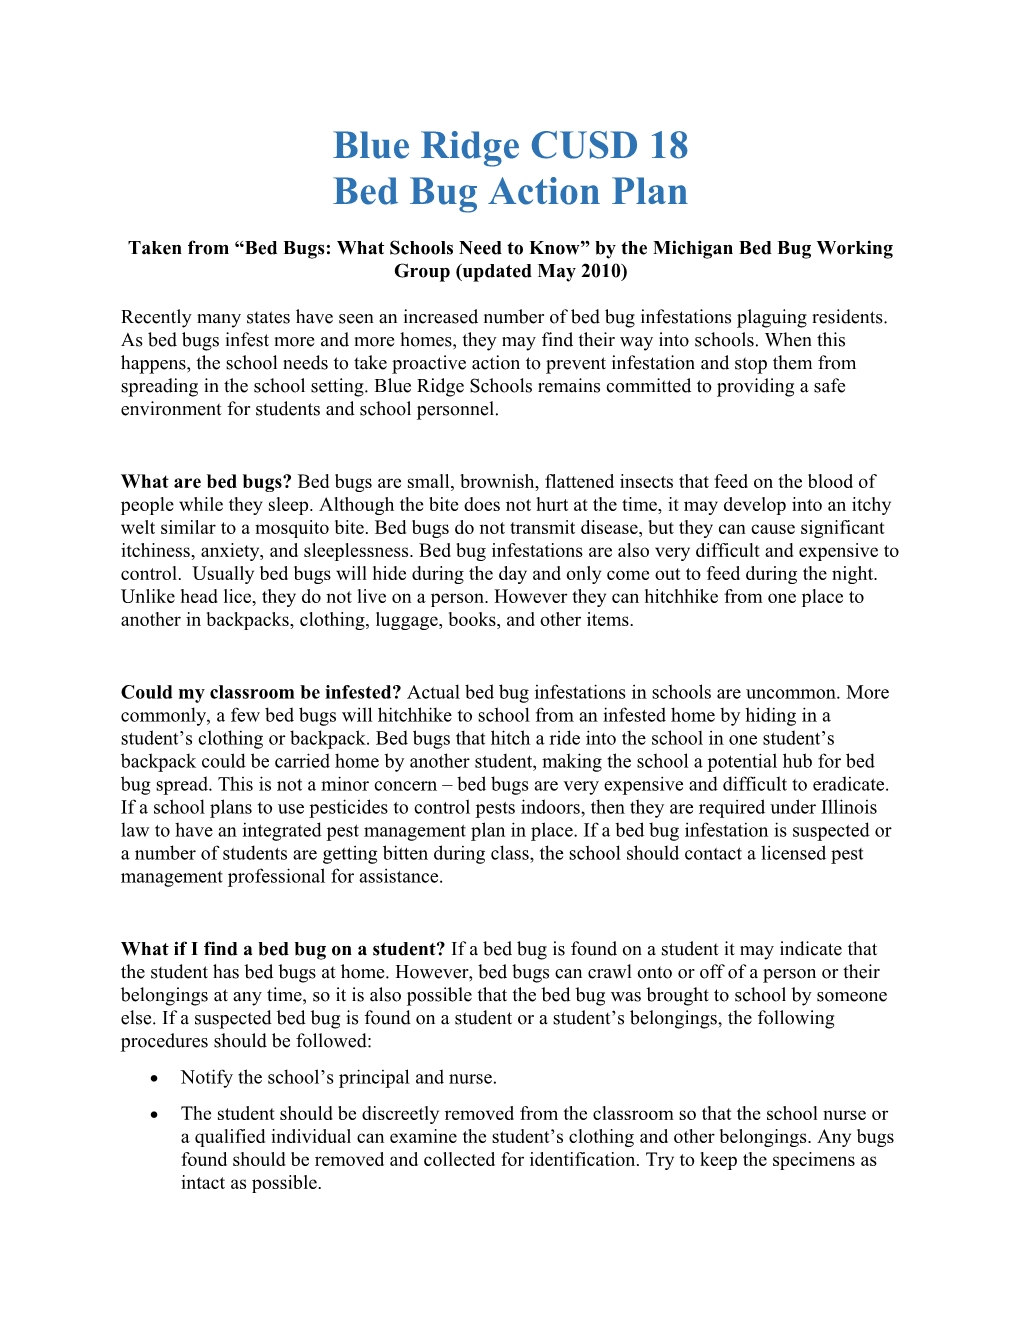 Bed Bug Action Plan